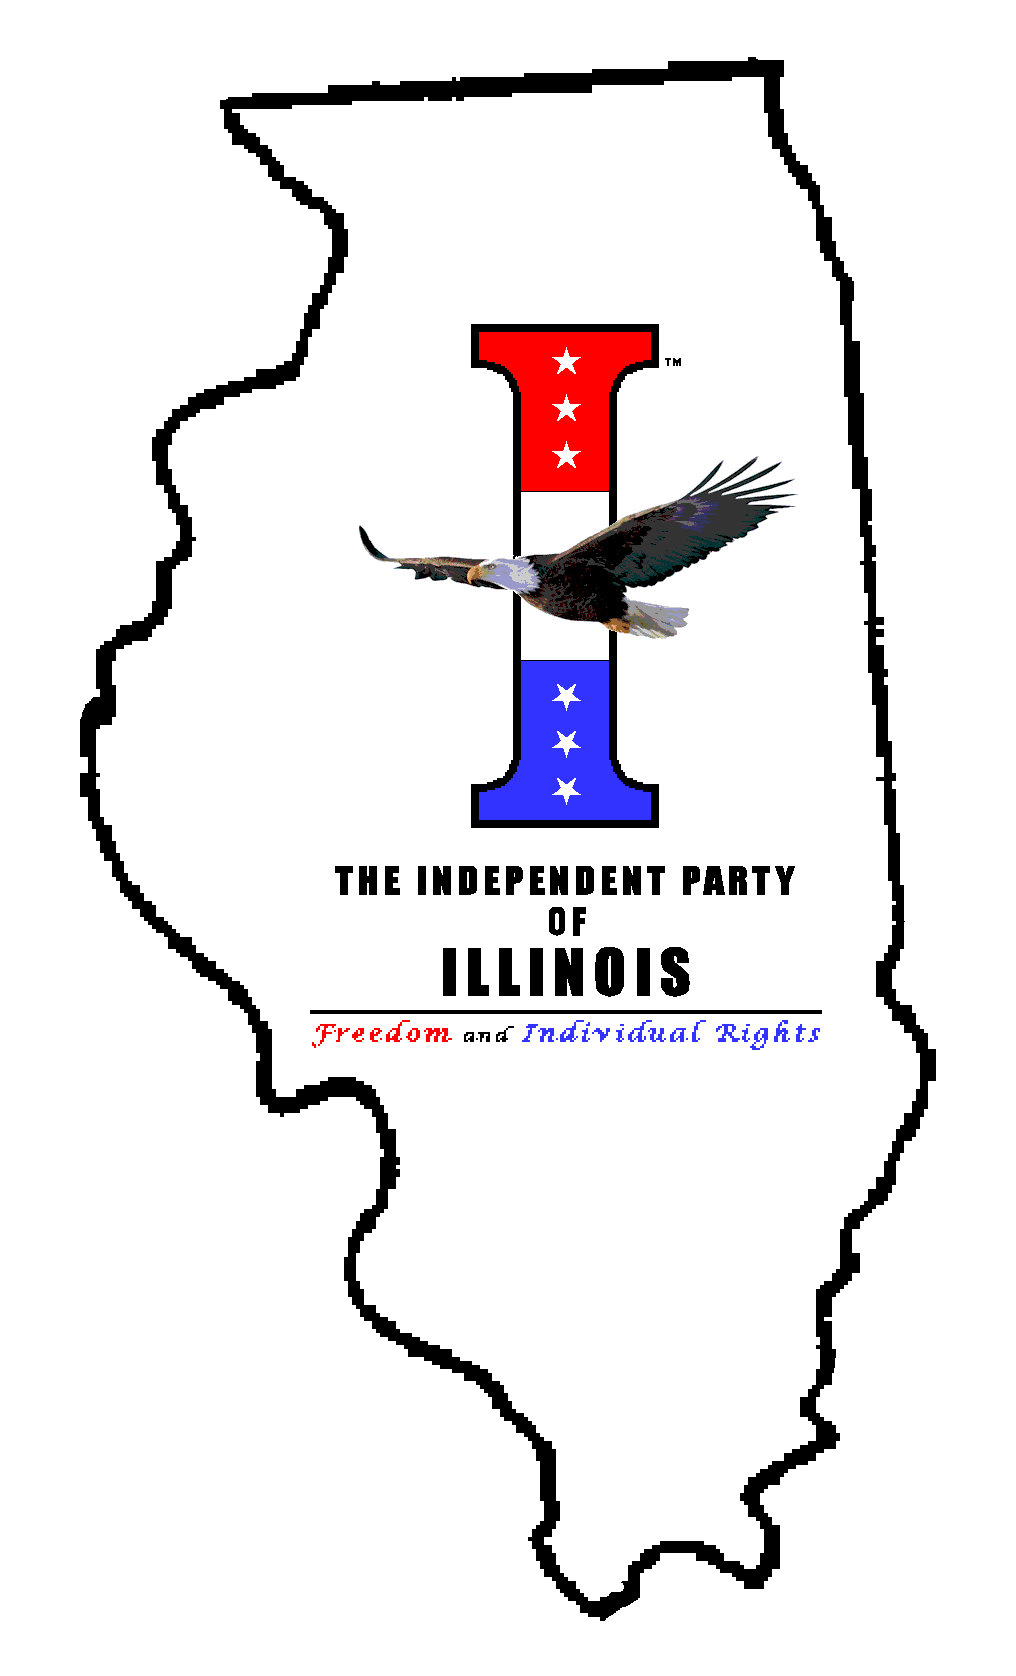 The Independent Party of Illinois!